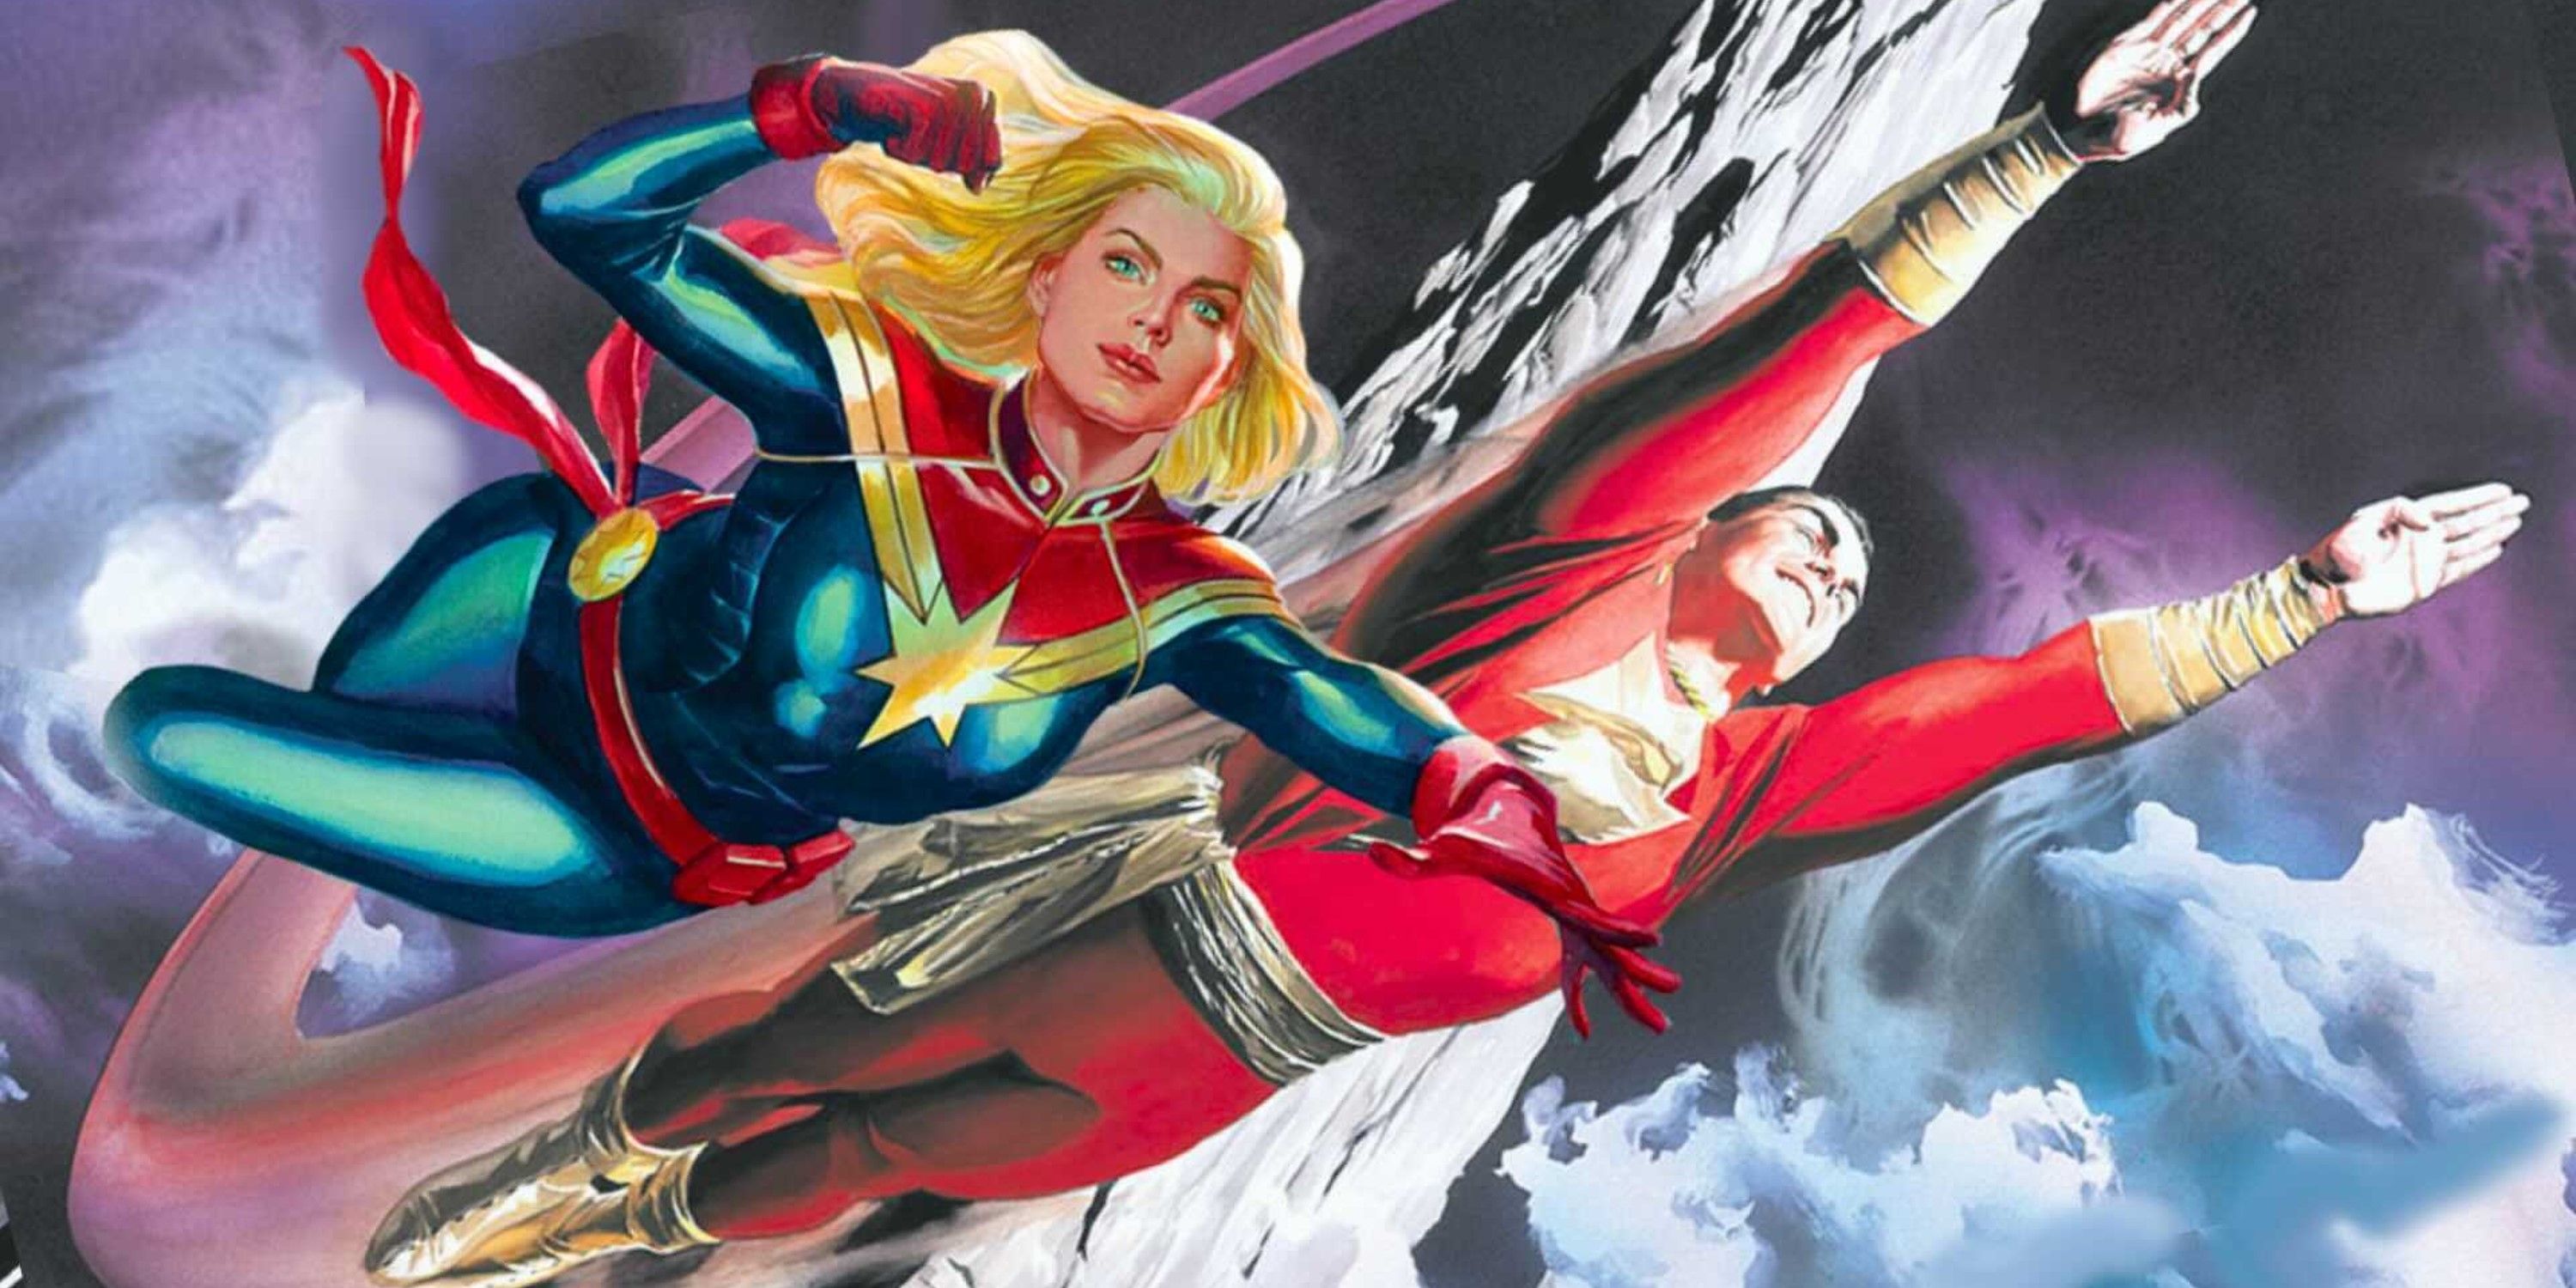 Carol Danvers and Billy Batson as Captain Marvel in Marvel and DC Comics, respectively.